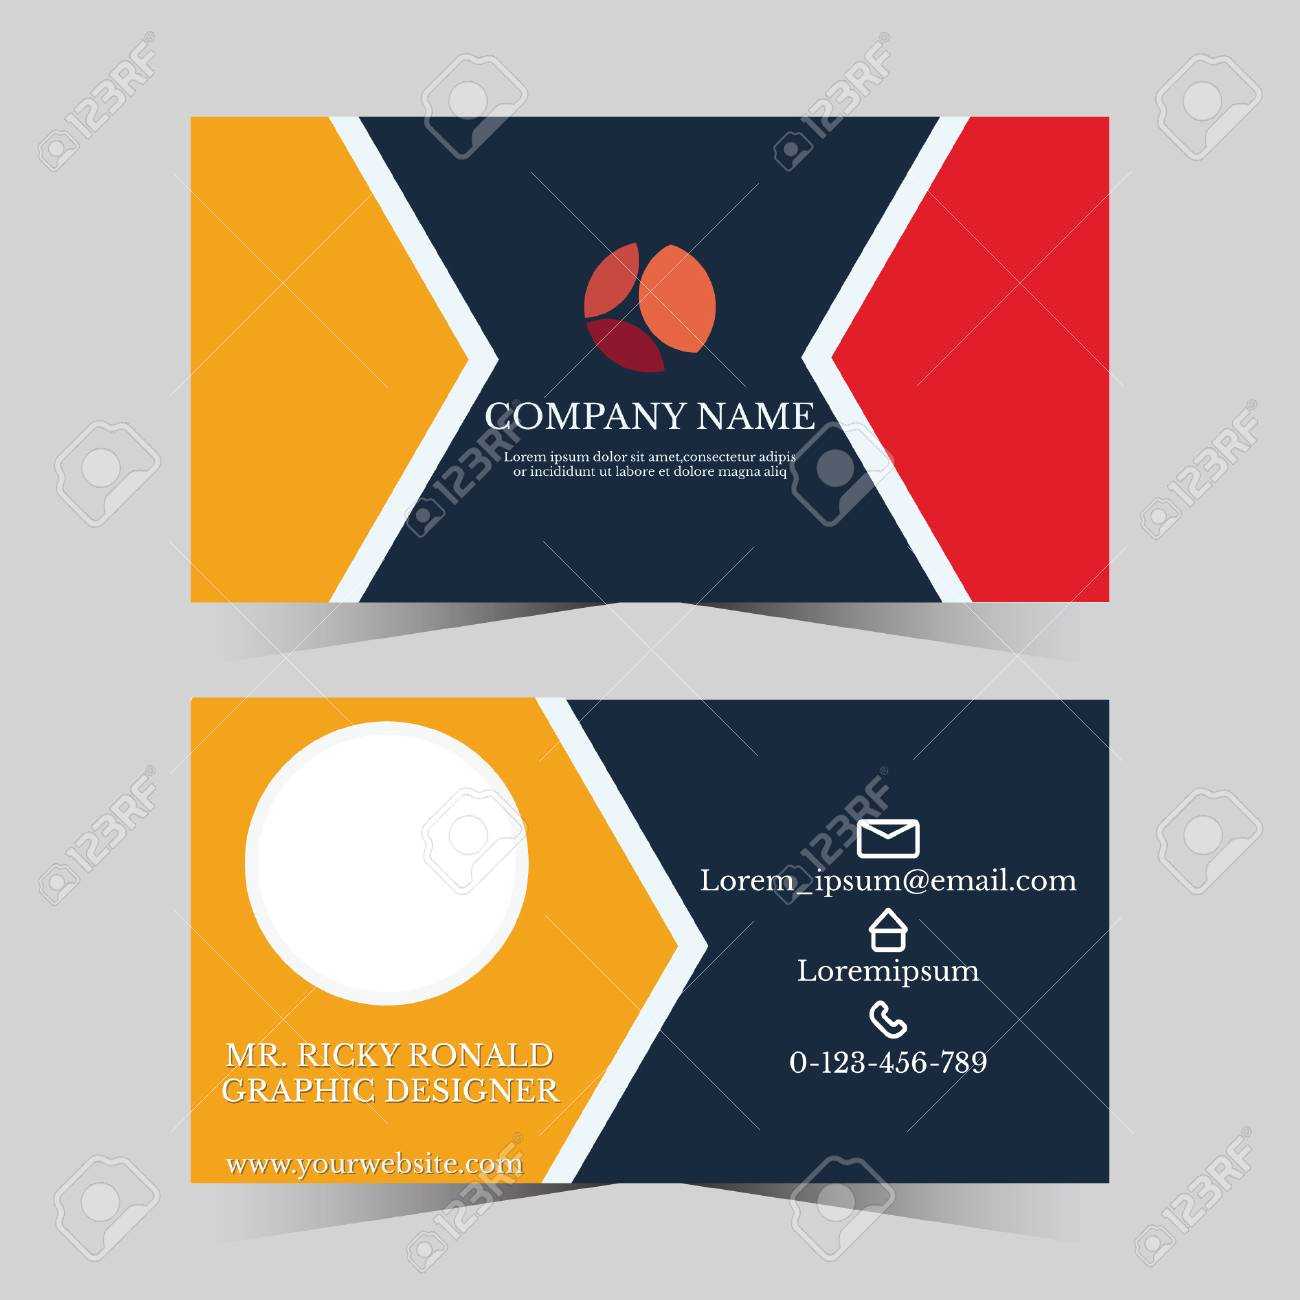 Calling Card Template For Business Man With Geometric Design Throughout Template For Calling Card